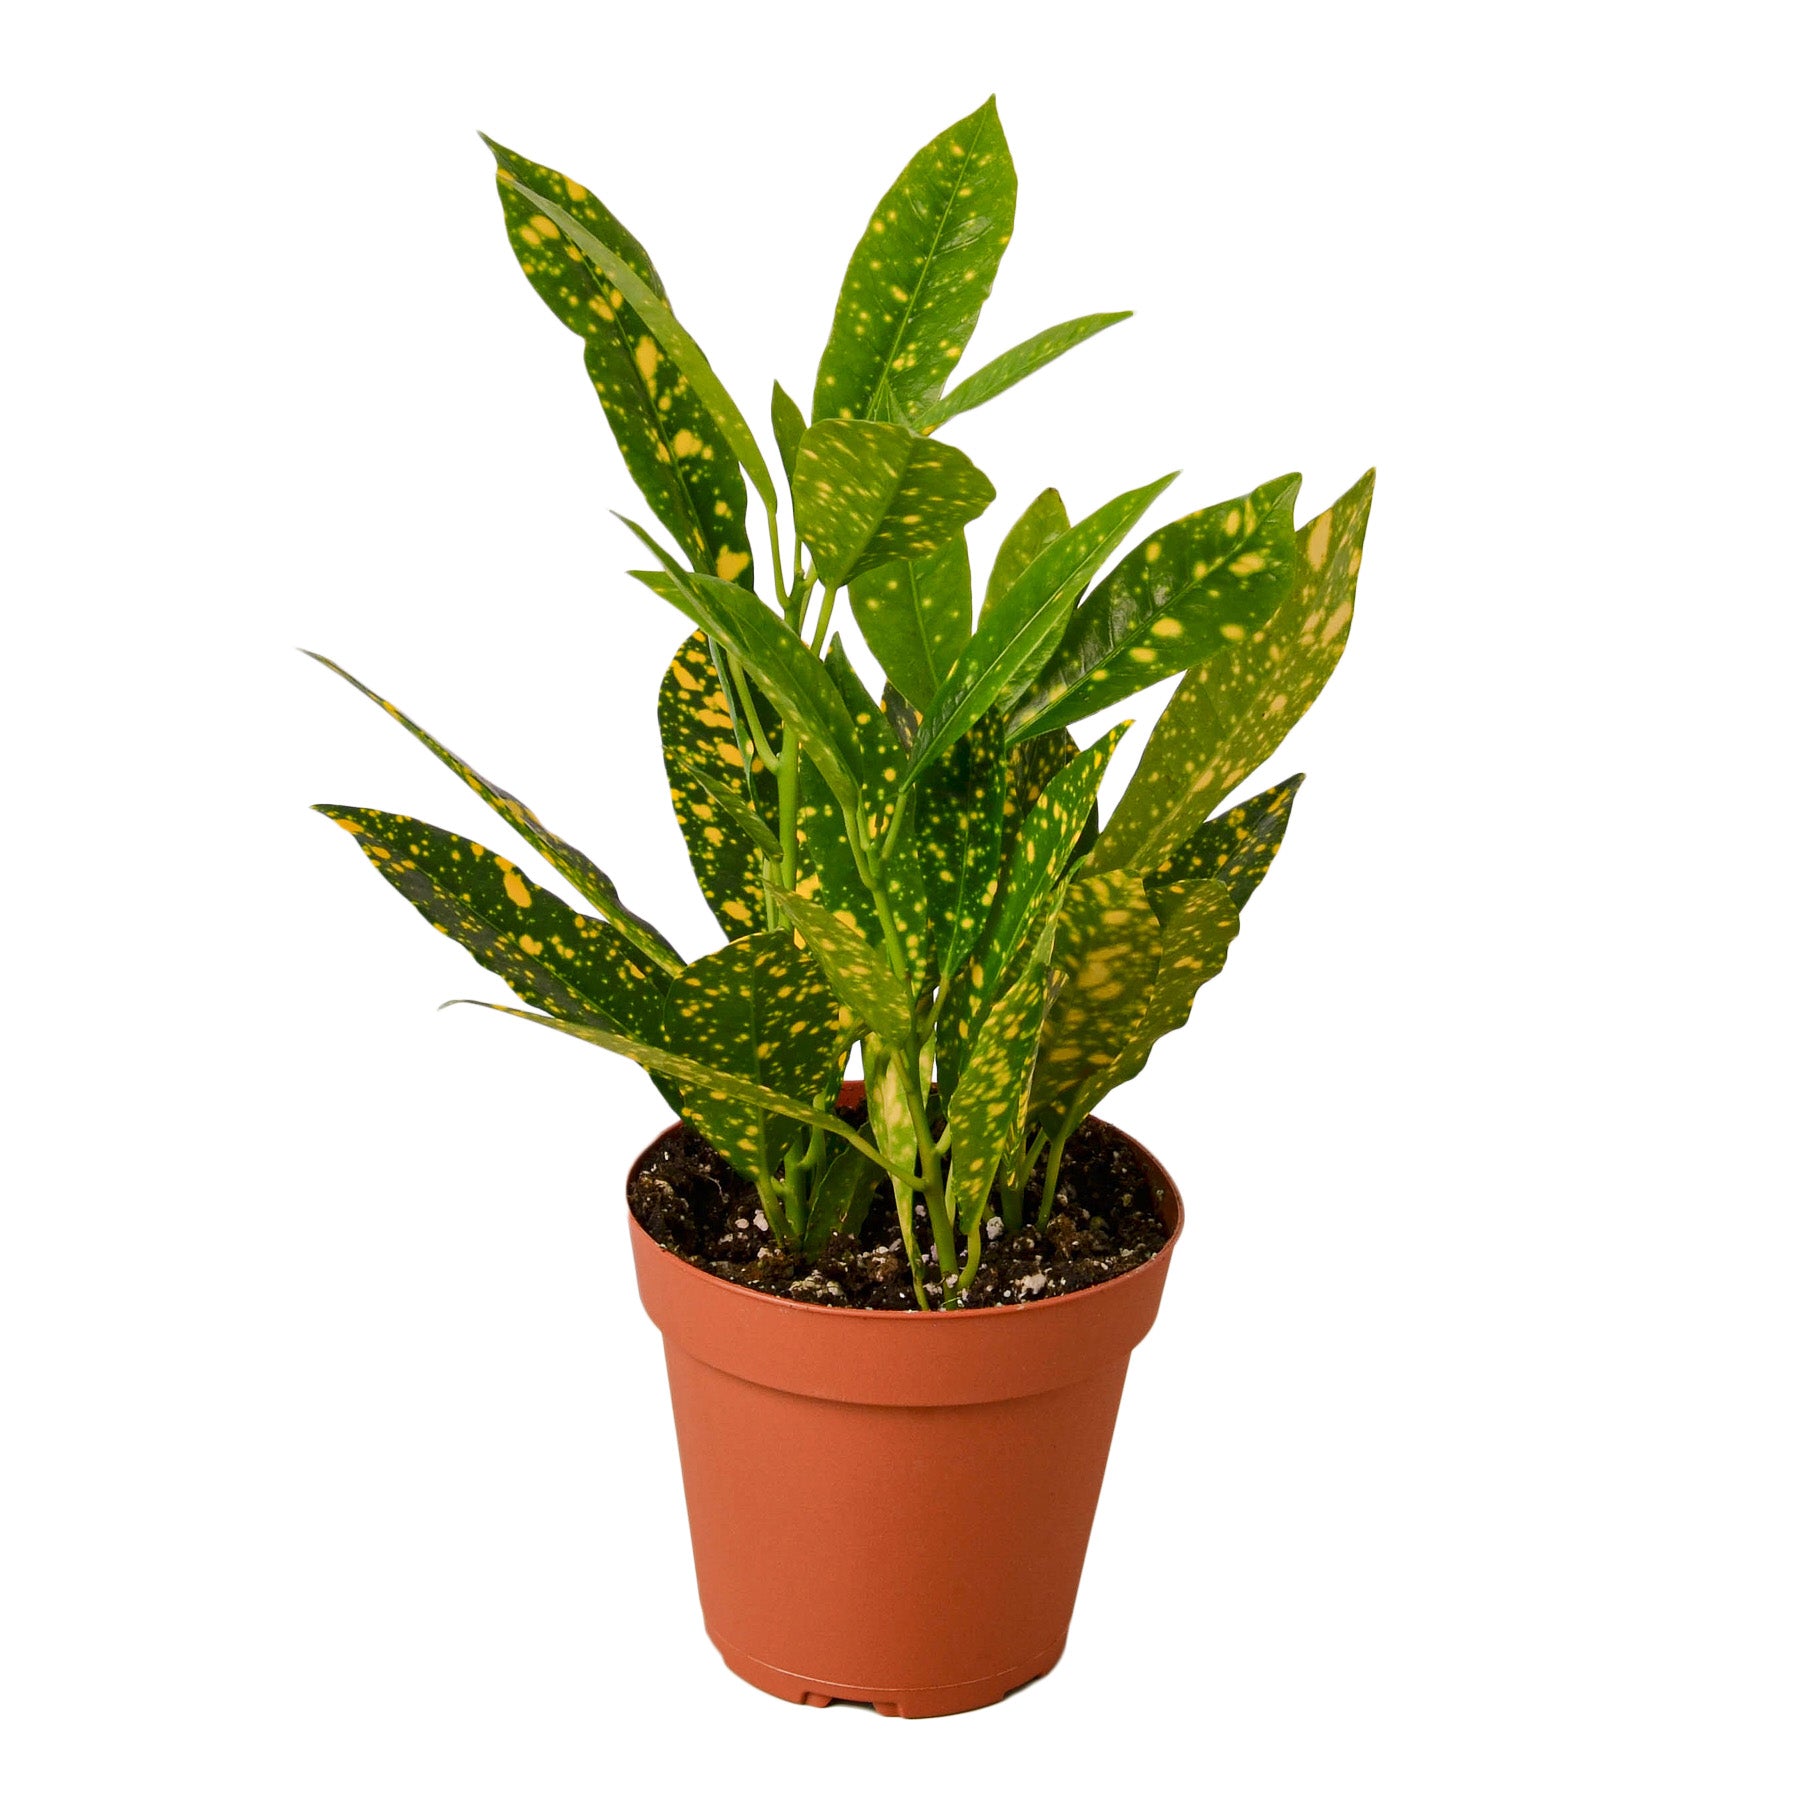 A potted plant with yellow spots on it available at the best garden center near me.